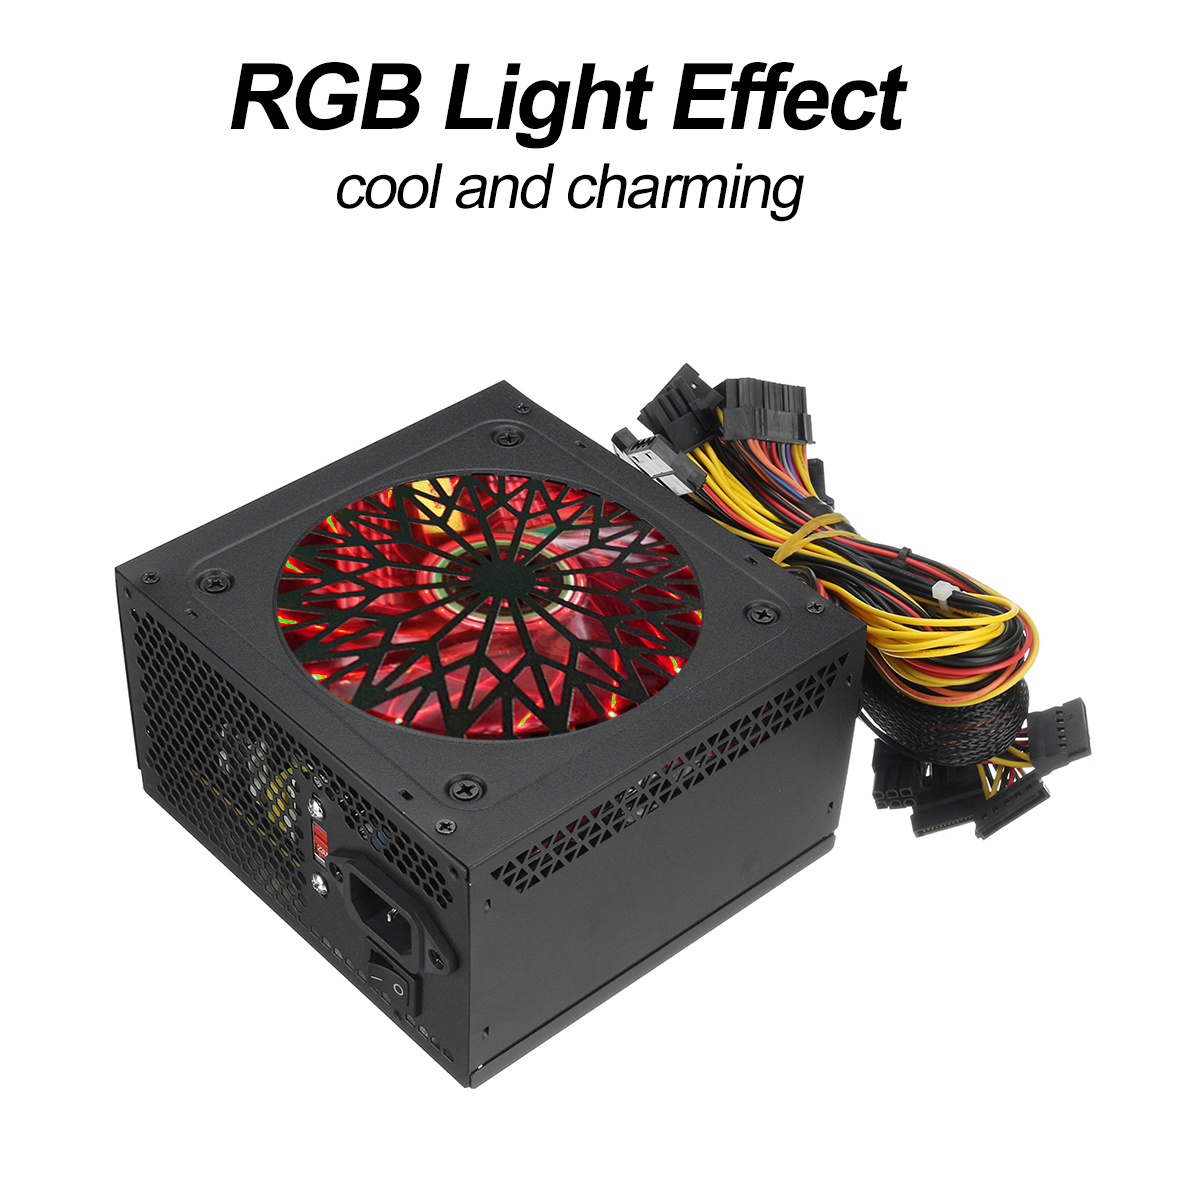 Find 1000W PSU PC Power Supply Unit Passive RGB 12cm Quiet Fan ATX PCI E SATA PFC for Sale on Gipsybee.com with cryptocurrencies